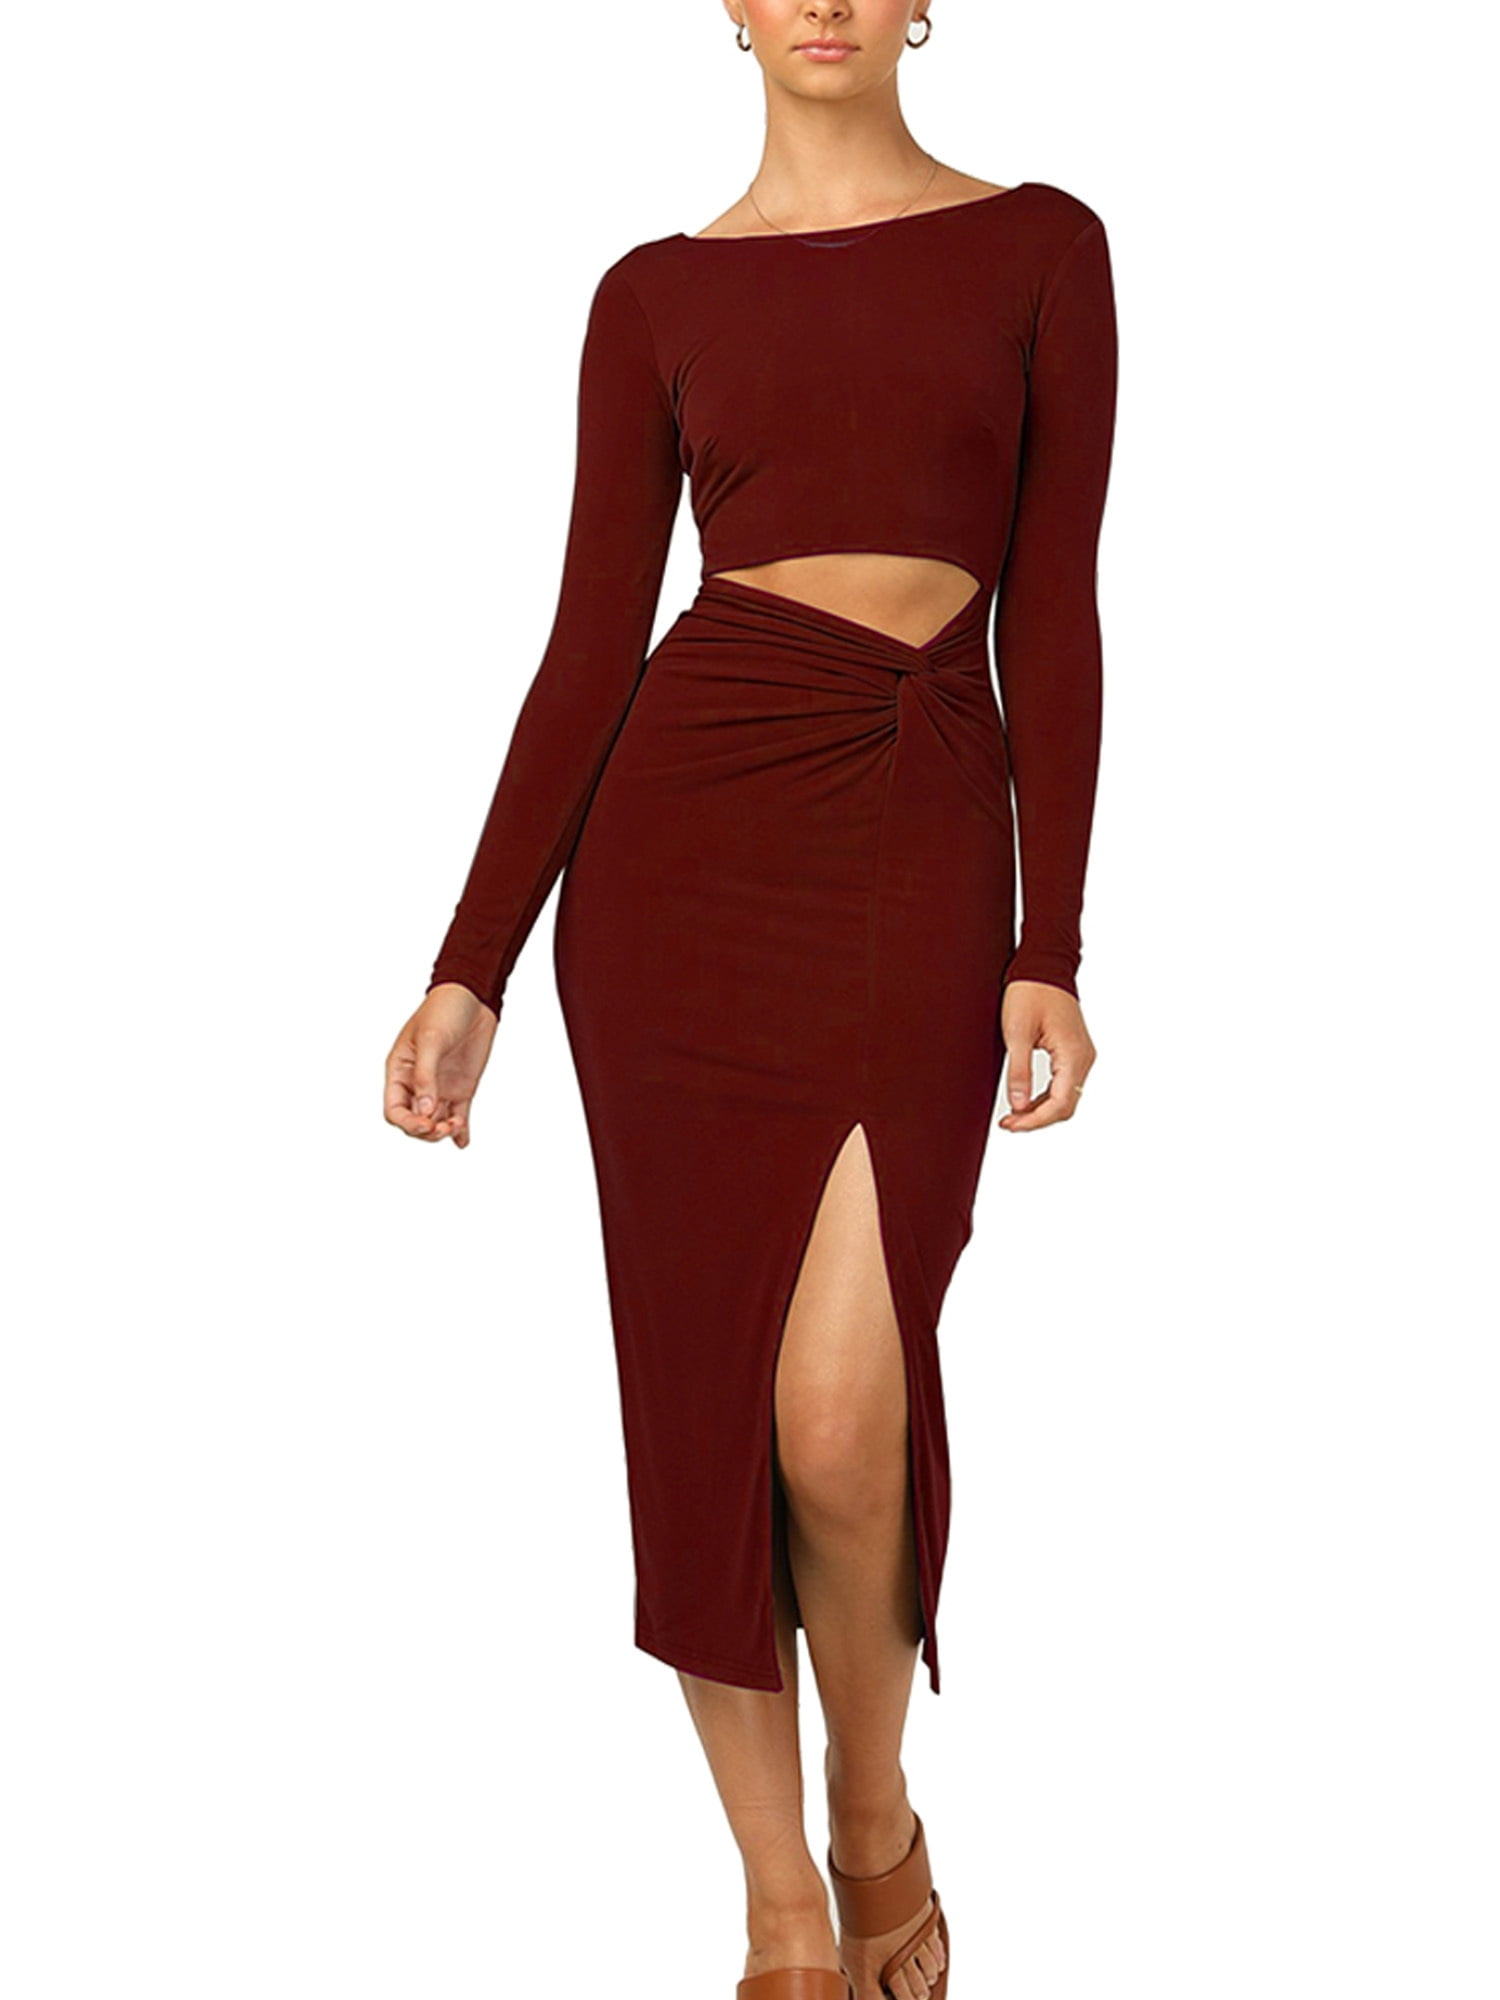 Eleluny Womens Long Sleeve Bodycon Midi Dress Sexy Twist Cut Out Side Slit Dresses Party